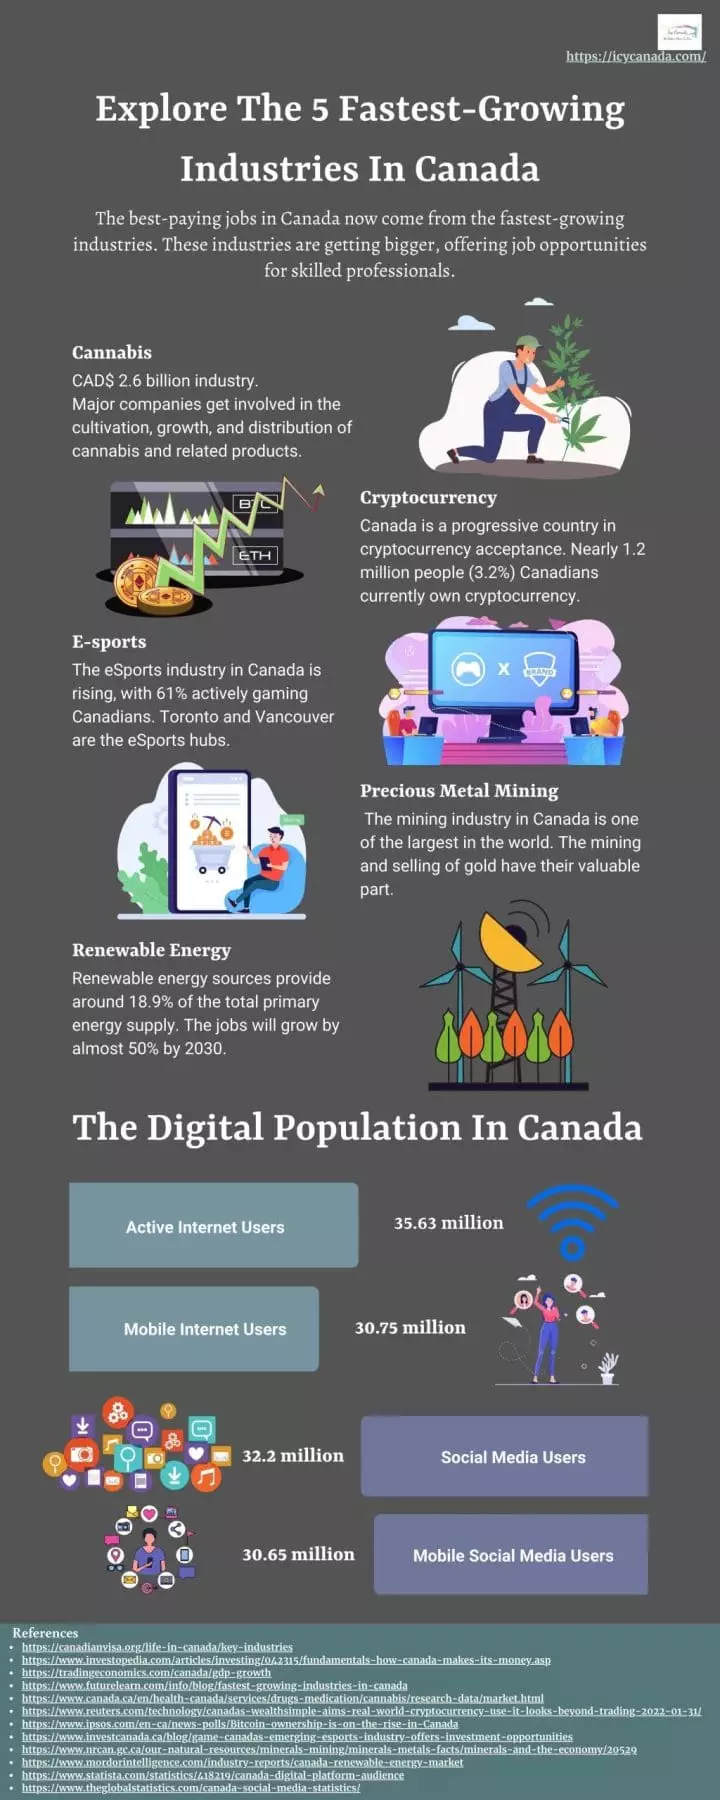 Explore The 5 Fastest-Growing Industries In Canada